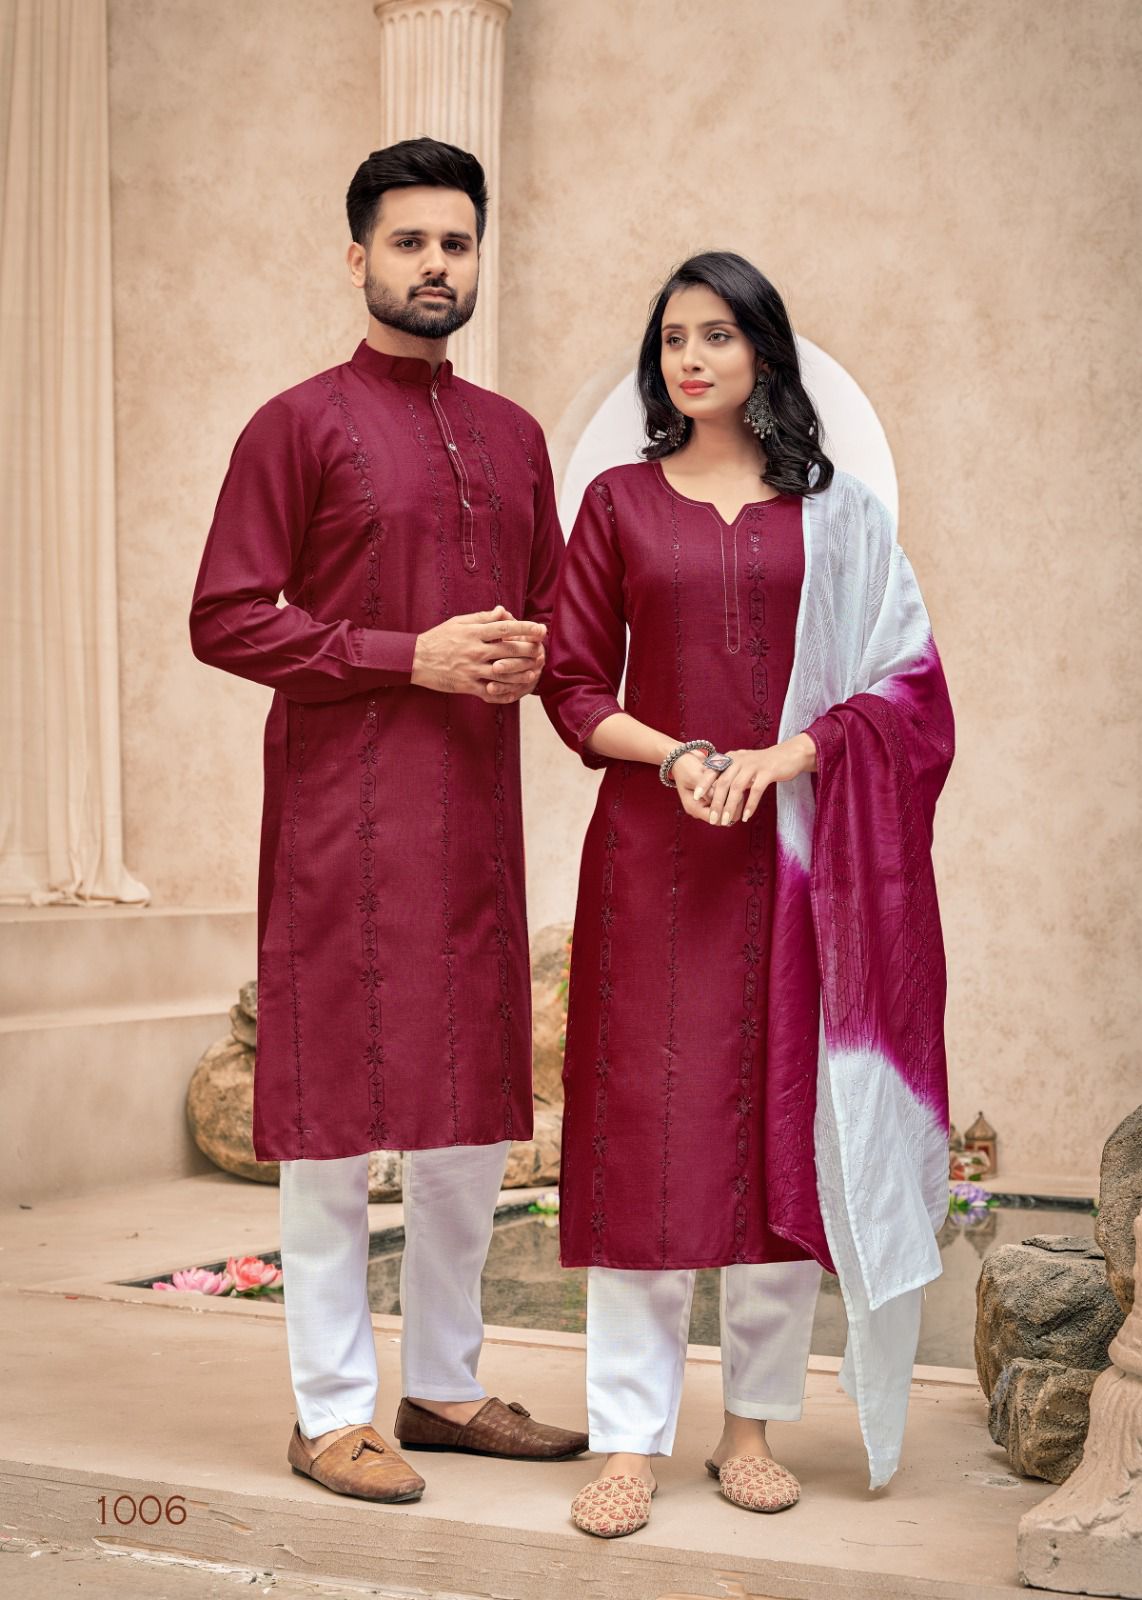 Traditional Matching Couple dress for Men and Women  mahezon